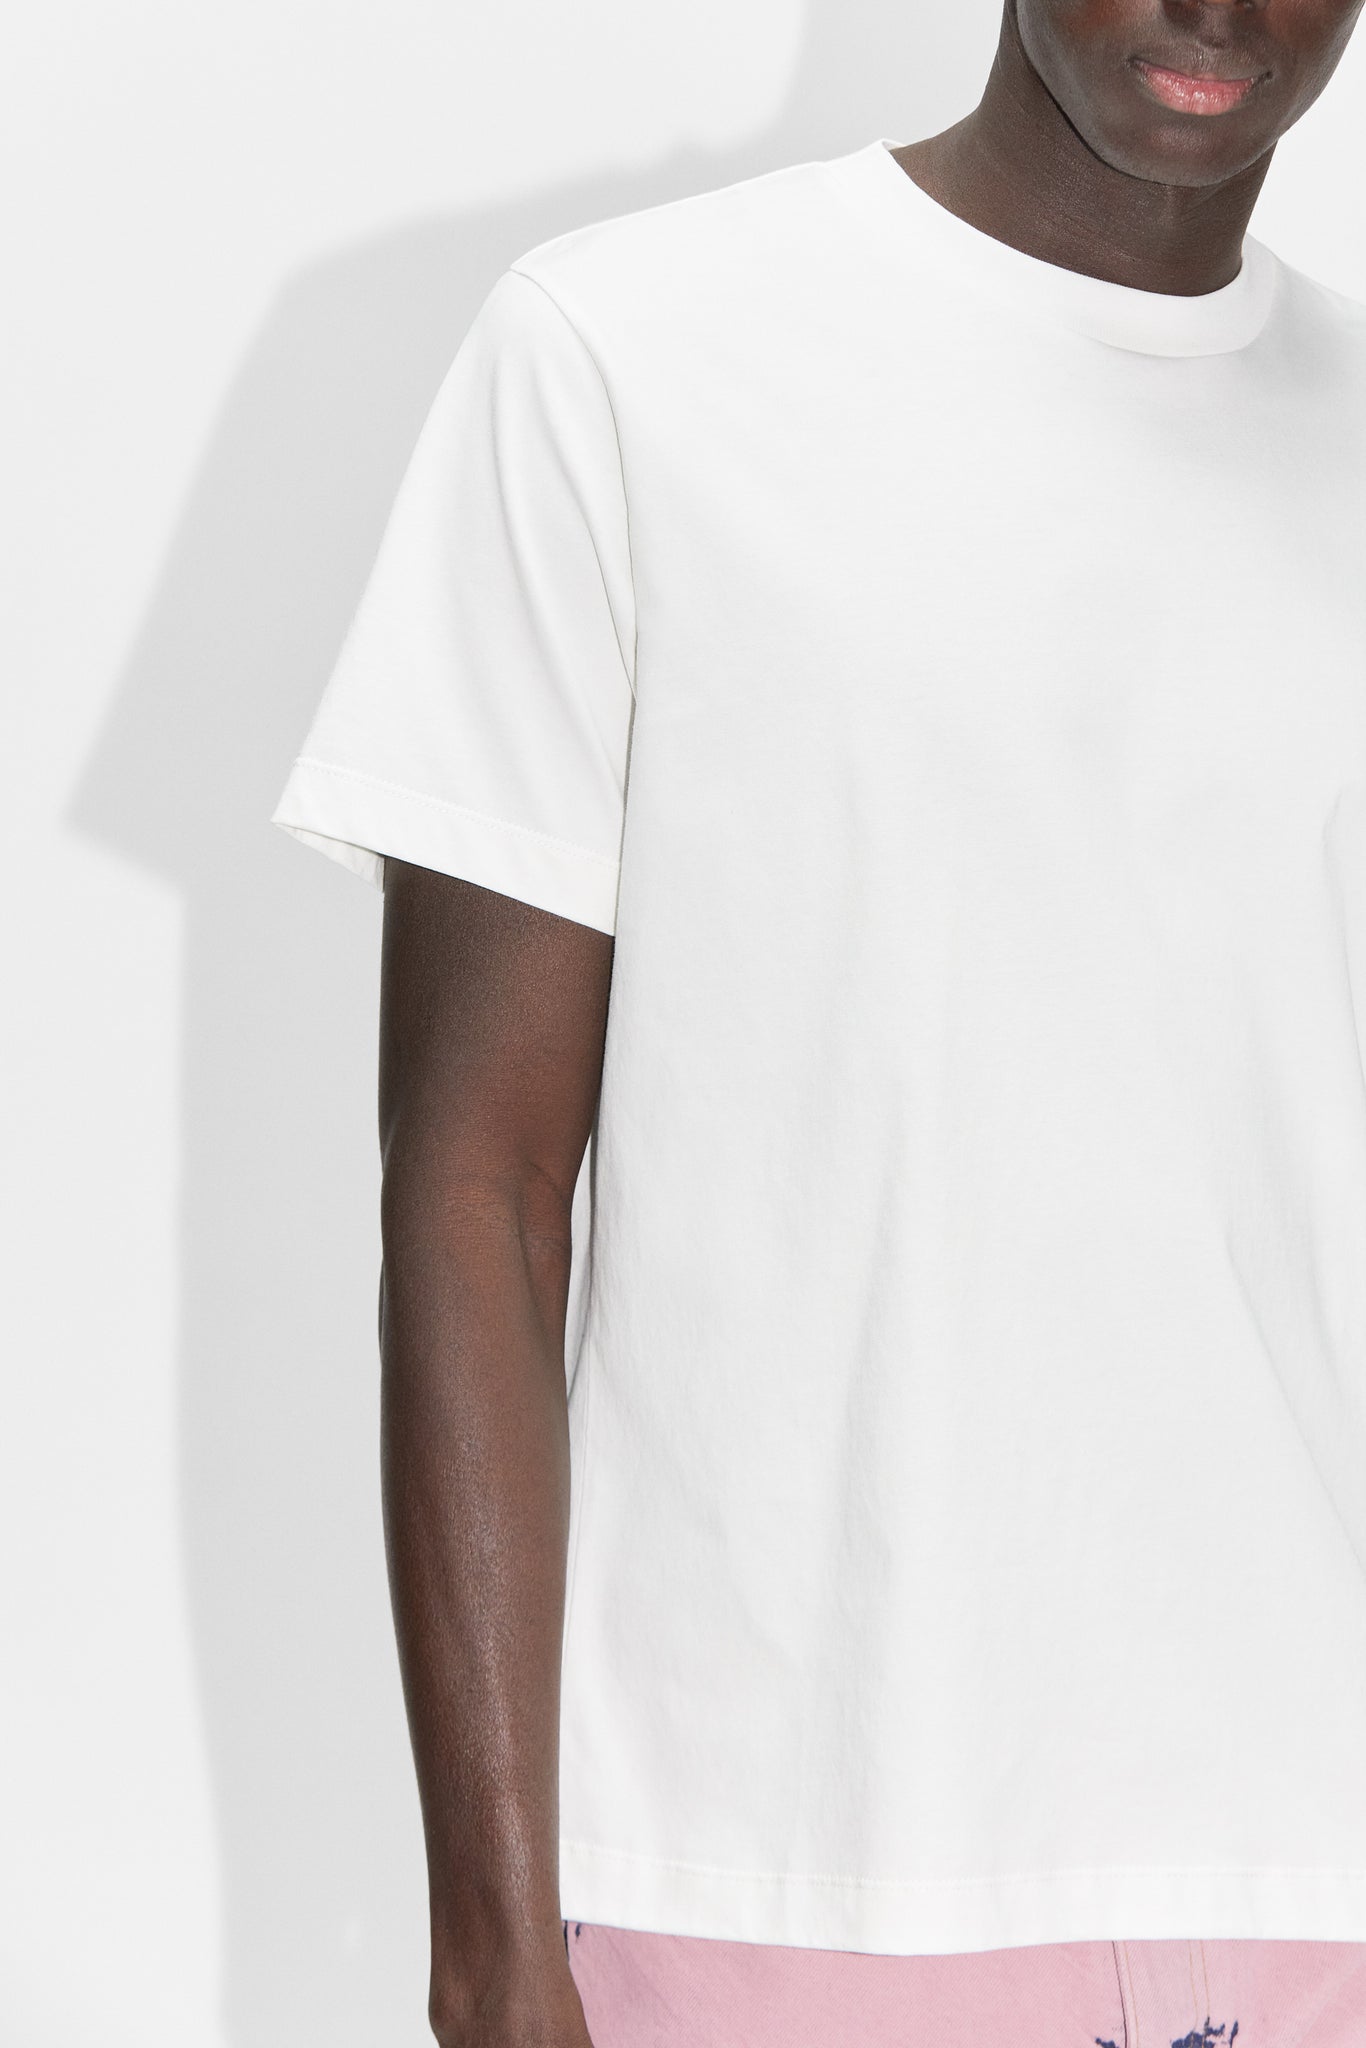 Relaxed Crew Neck T-shirt in Off White & Faded Black – HOPE STHLM